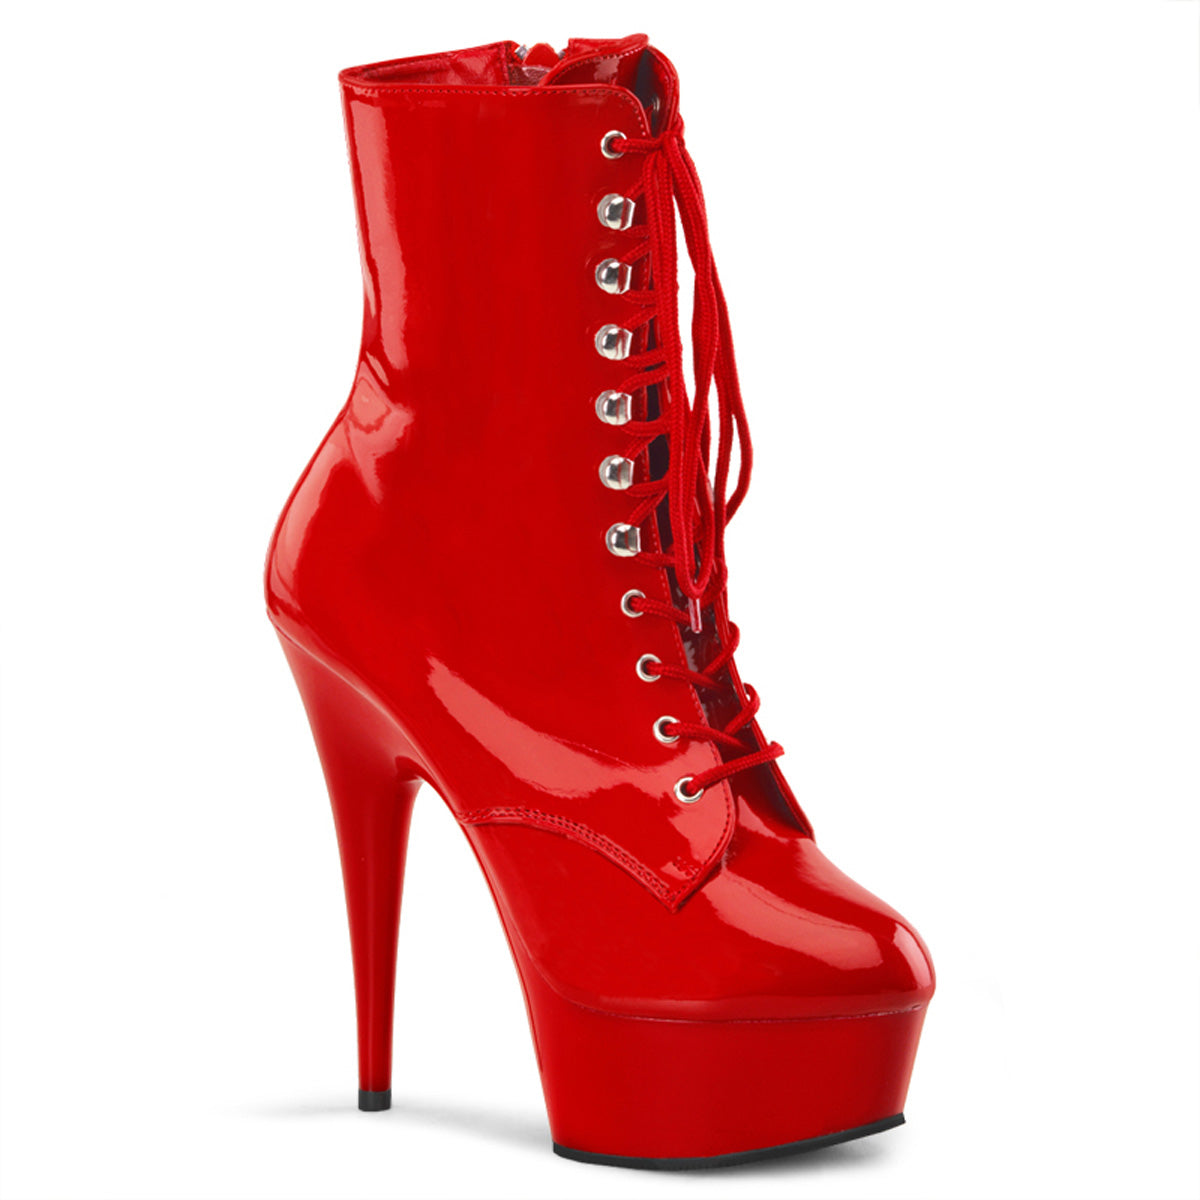 DELIGHT-1020 Kinky boots for Strippers